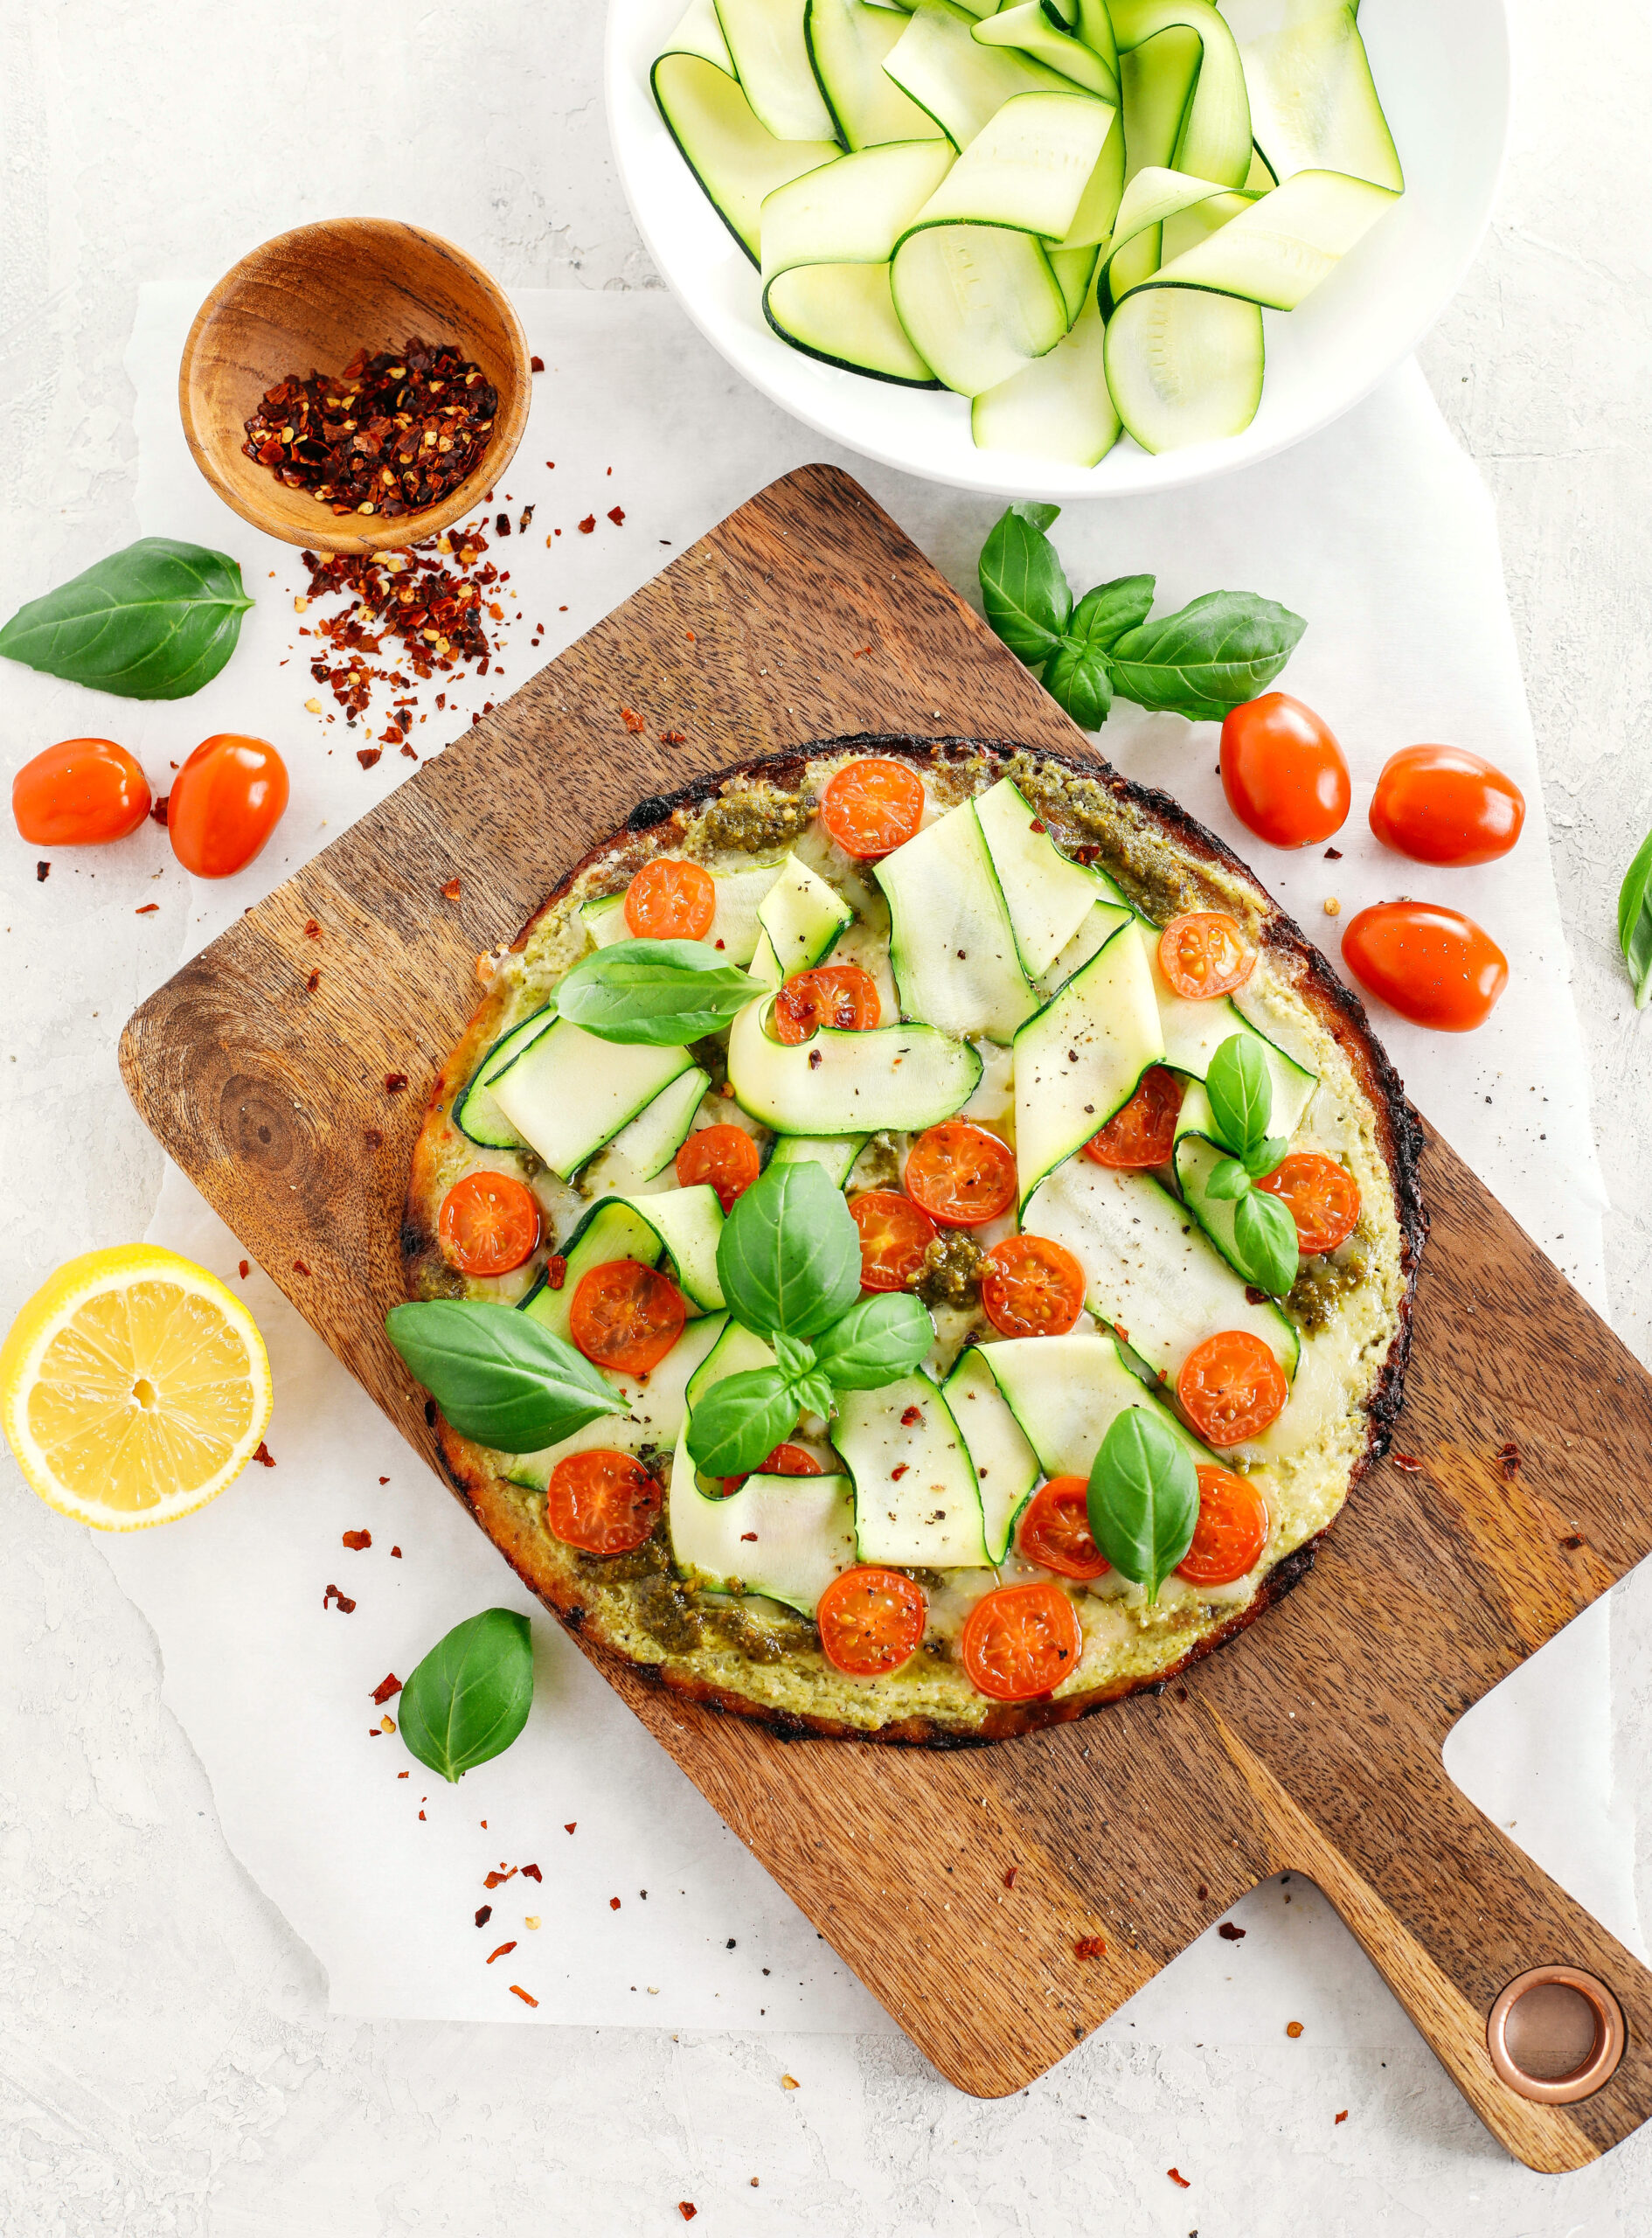 Garden Pesto Cauliflower Pizza loaded with fresh tomatoes, zucchini, homemade basil pesto and ricotta all topped on a crispy cauliflower crust for a delicious low carb meal in just 15 minutes!